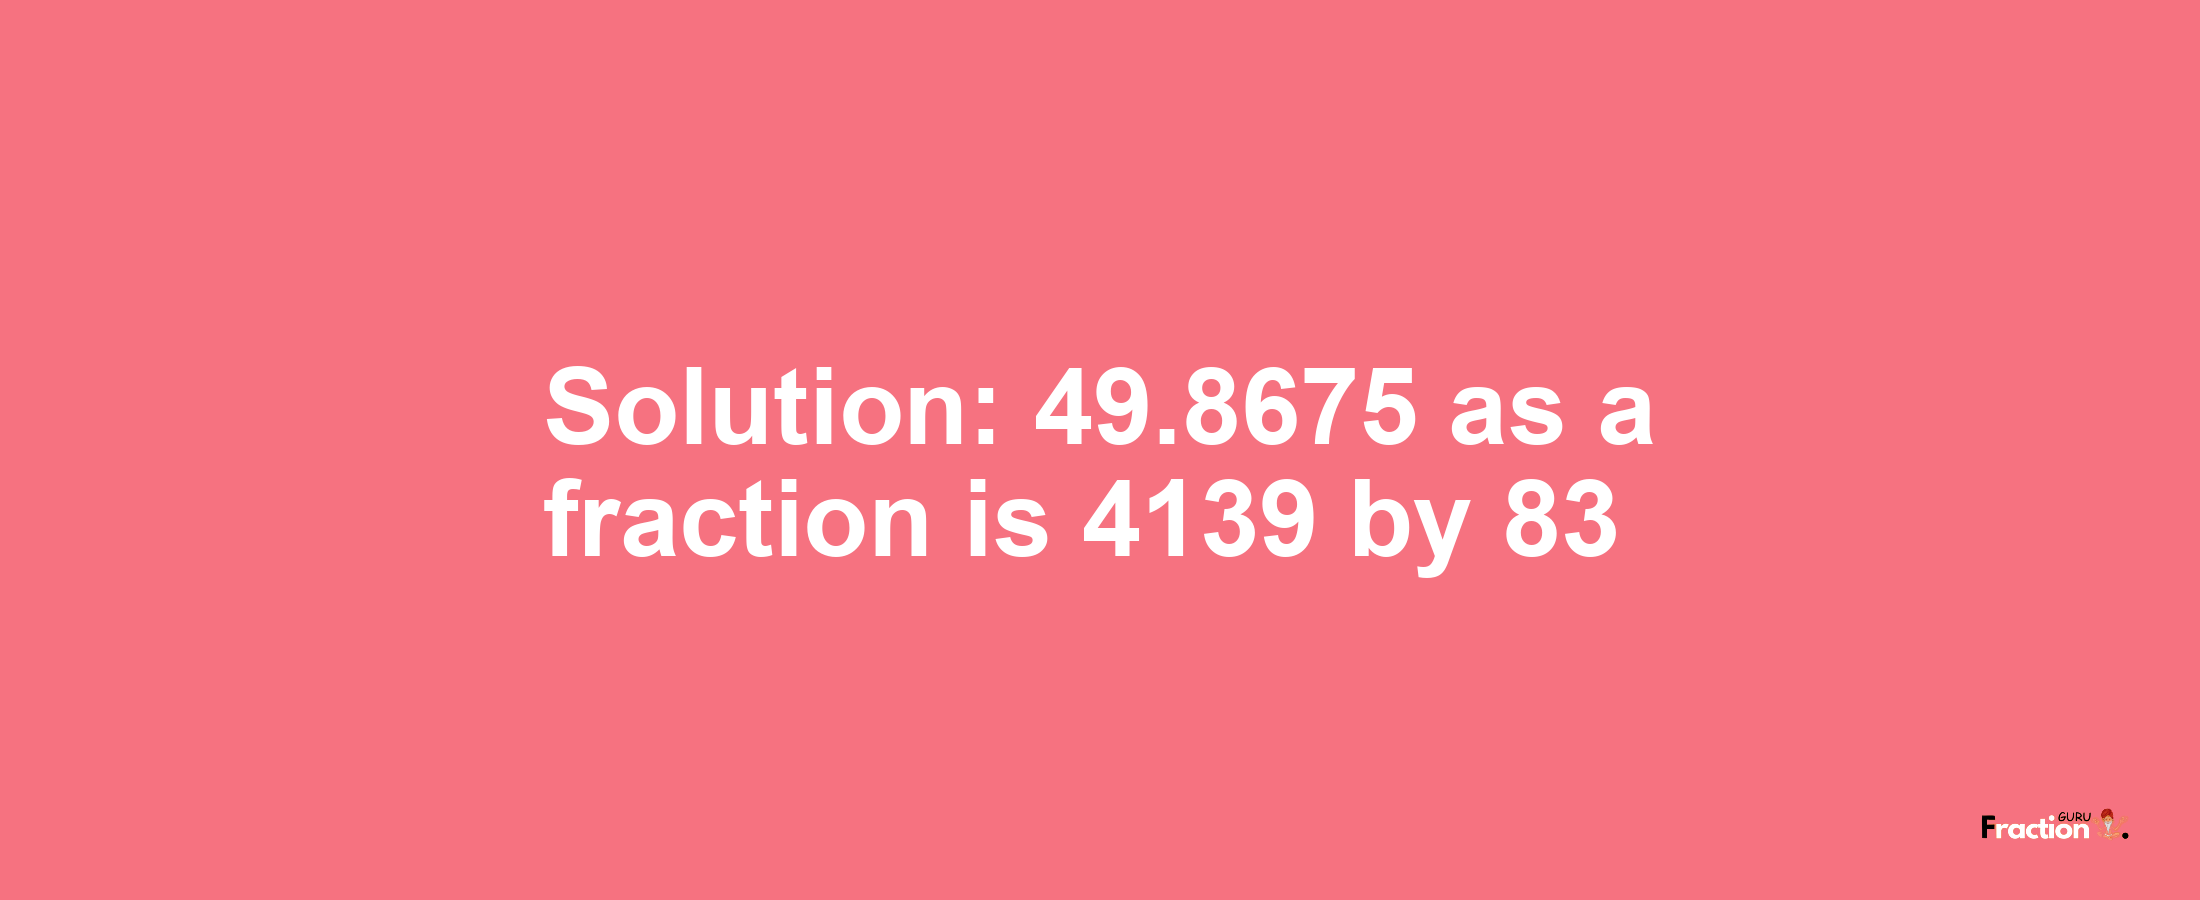 Solution:49.8675 as a fraction is 4139/83